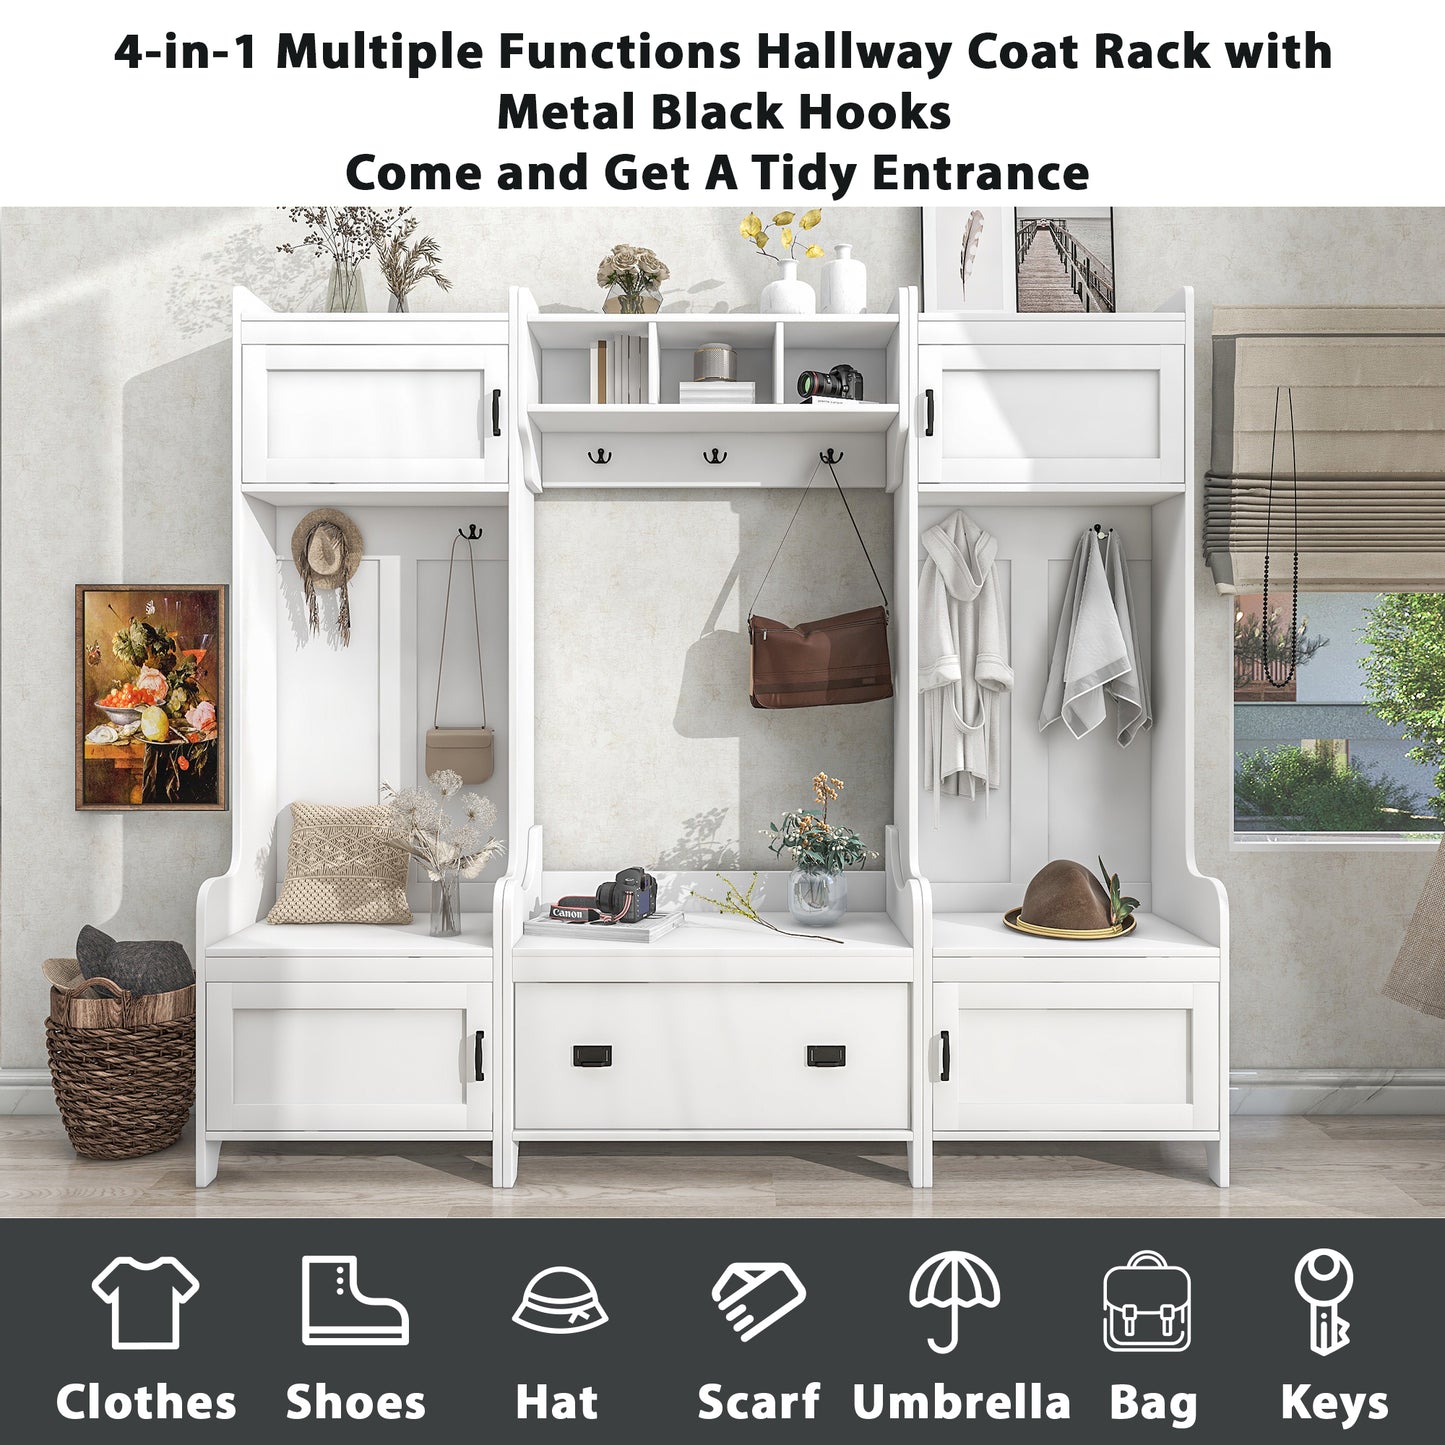 ON-TREND Modern Style 4-in-1 Multiple Functions Hallway Coat Rack with Seven Metal Black Hooks, Entryway Bench Hall Tree with Ample Storage Drawer, White (Old SKU: SD000006AAK)